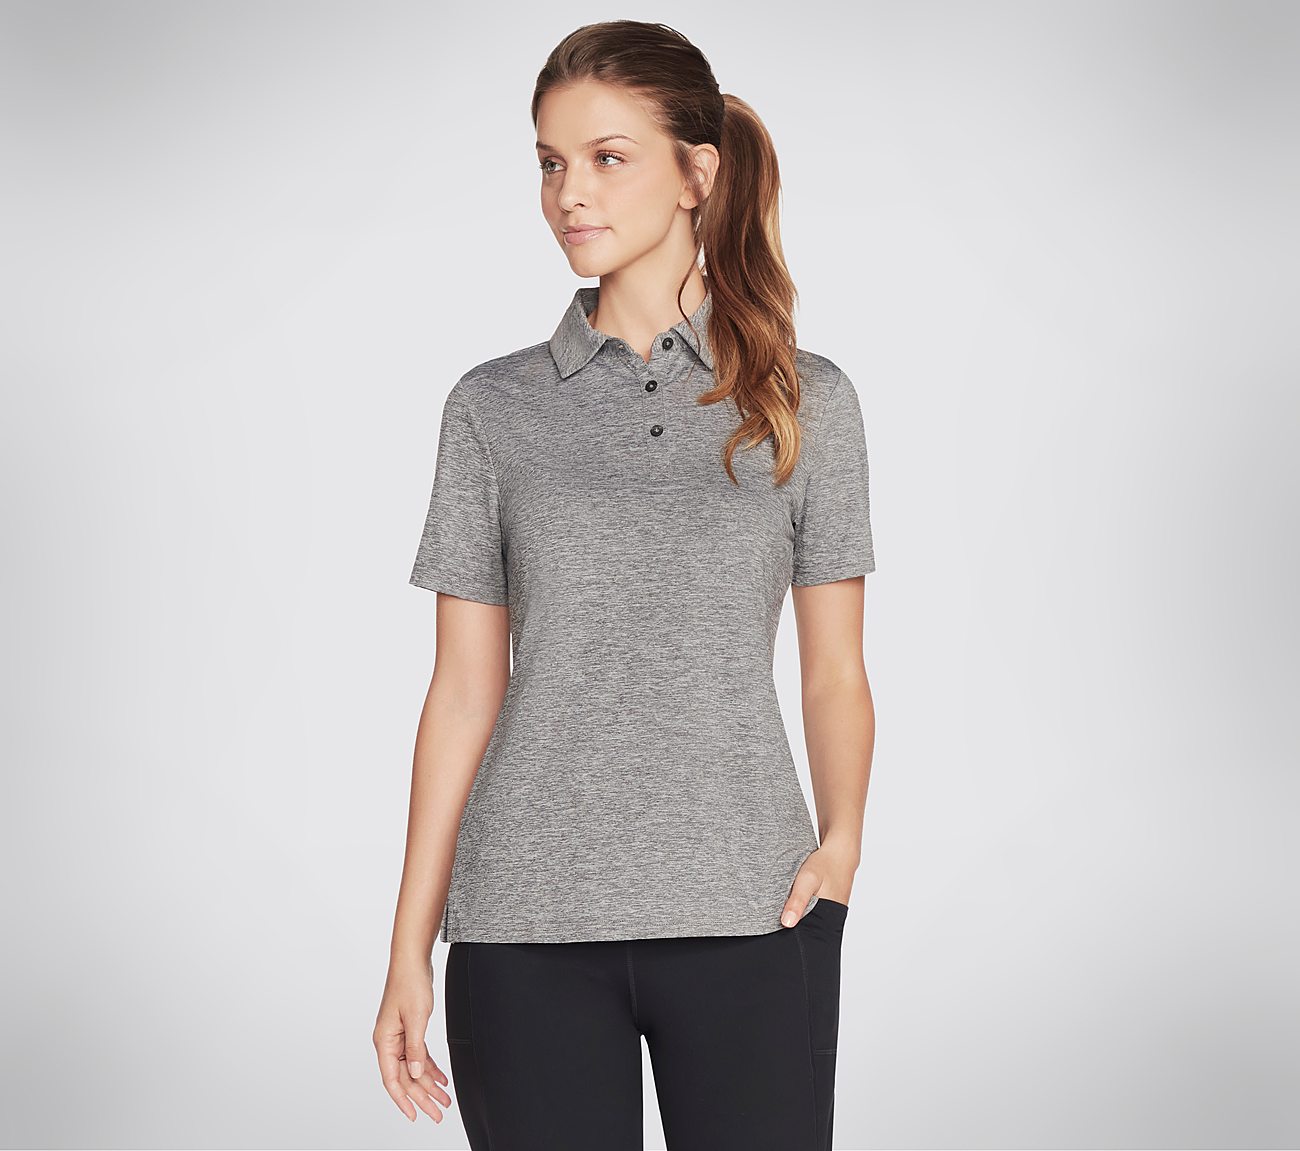 DIAMOND BLISSFUL CLUB POLO, BBBBLACK Apparels Lateral View